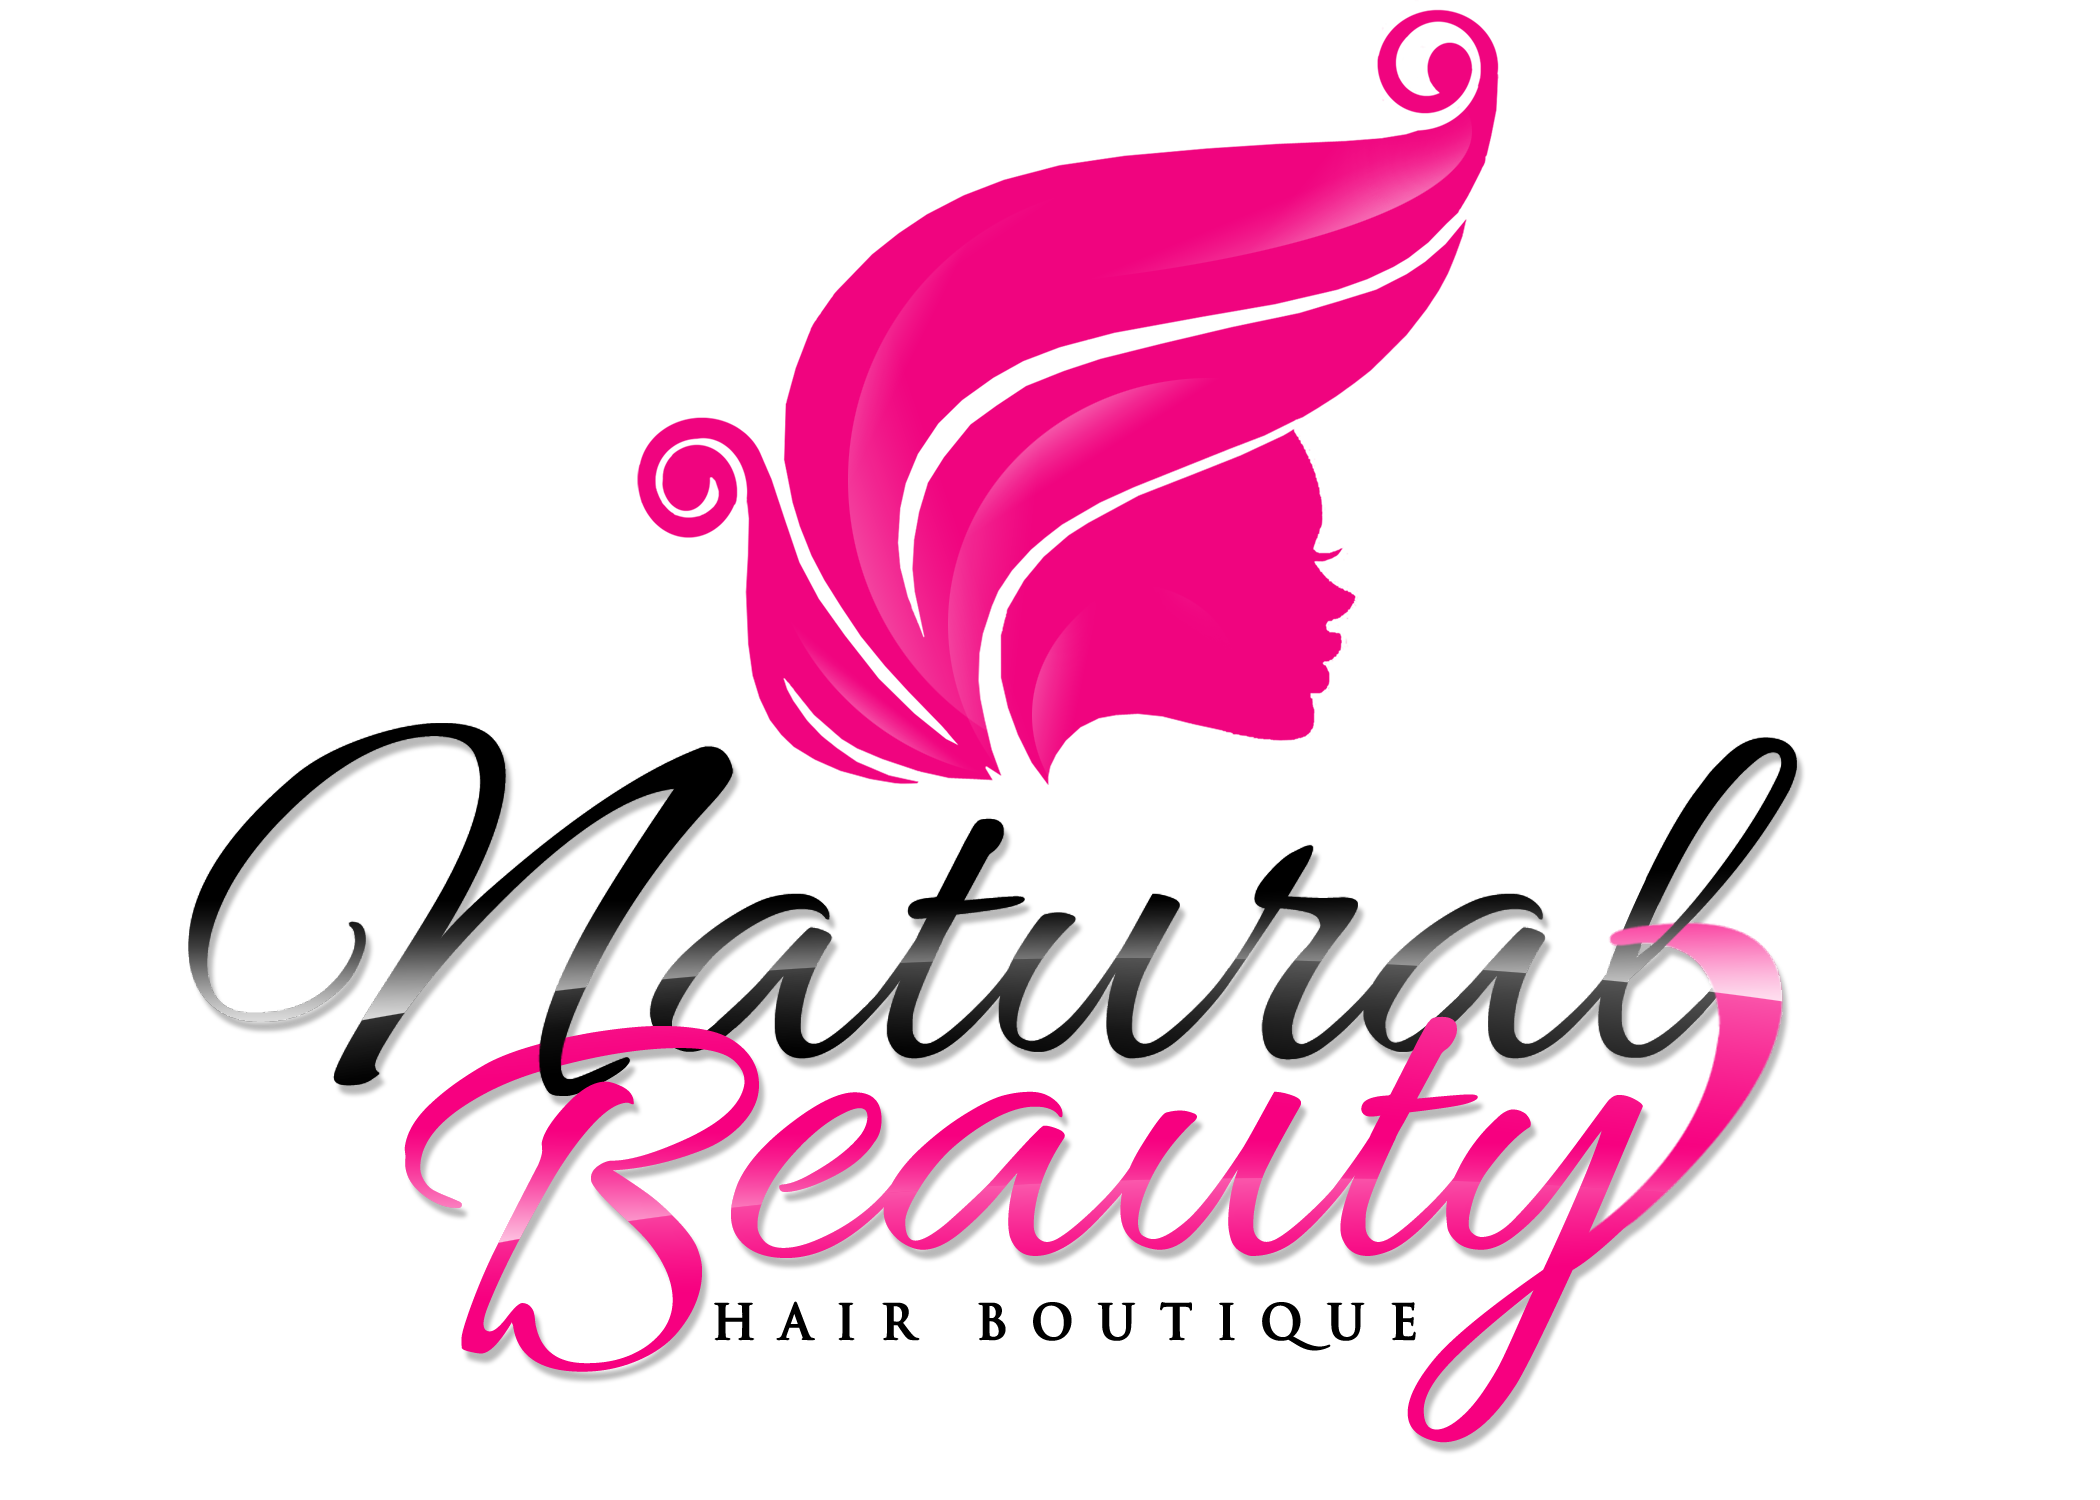 Natural Beauty Hair Boutique